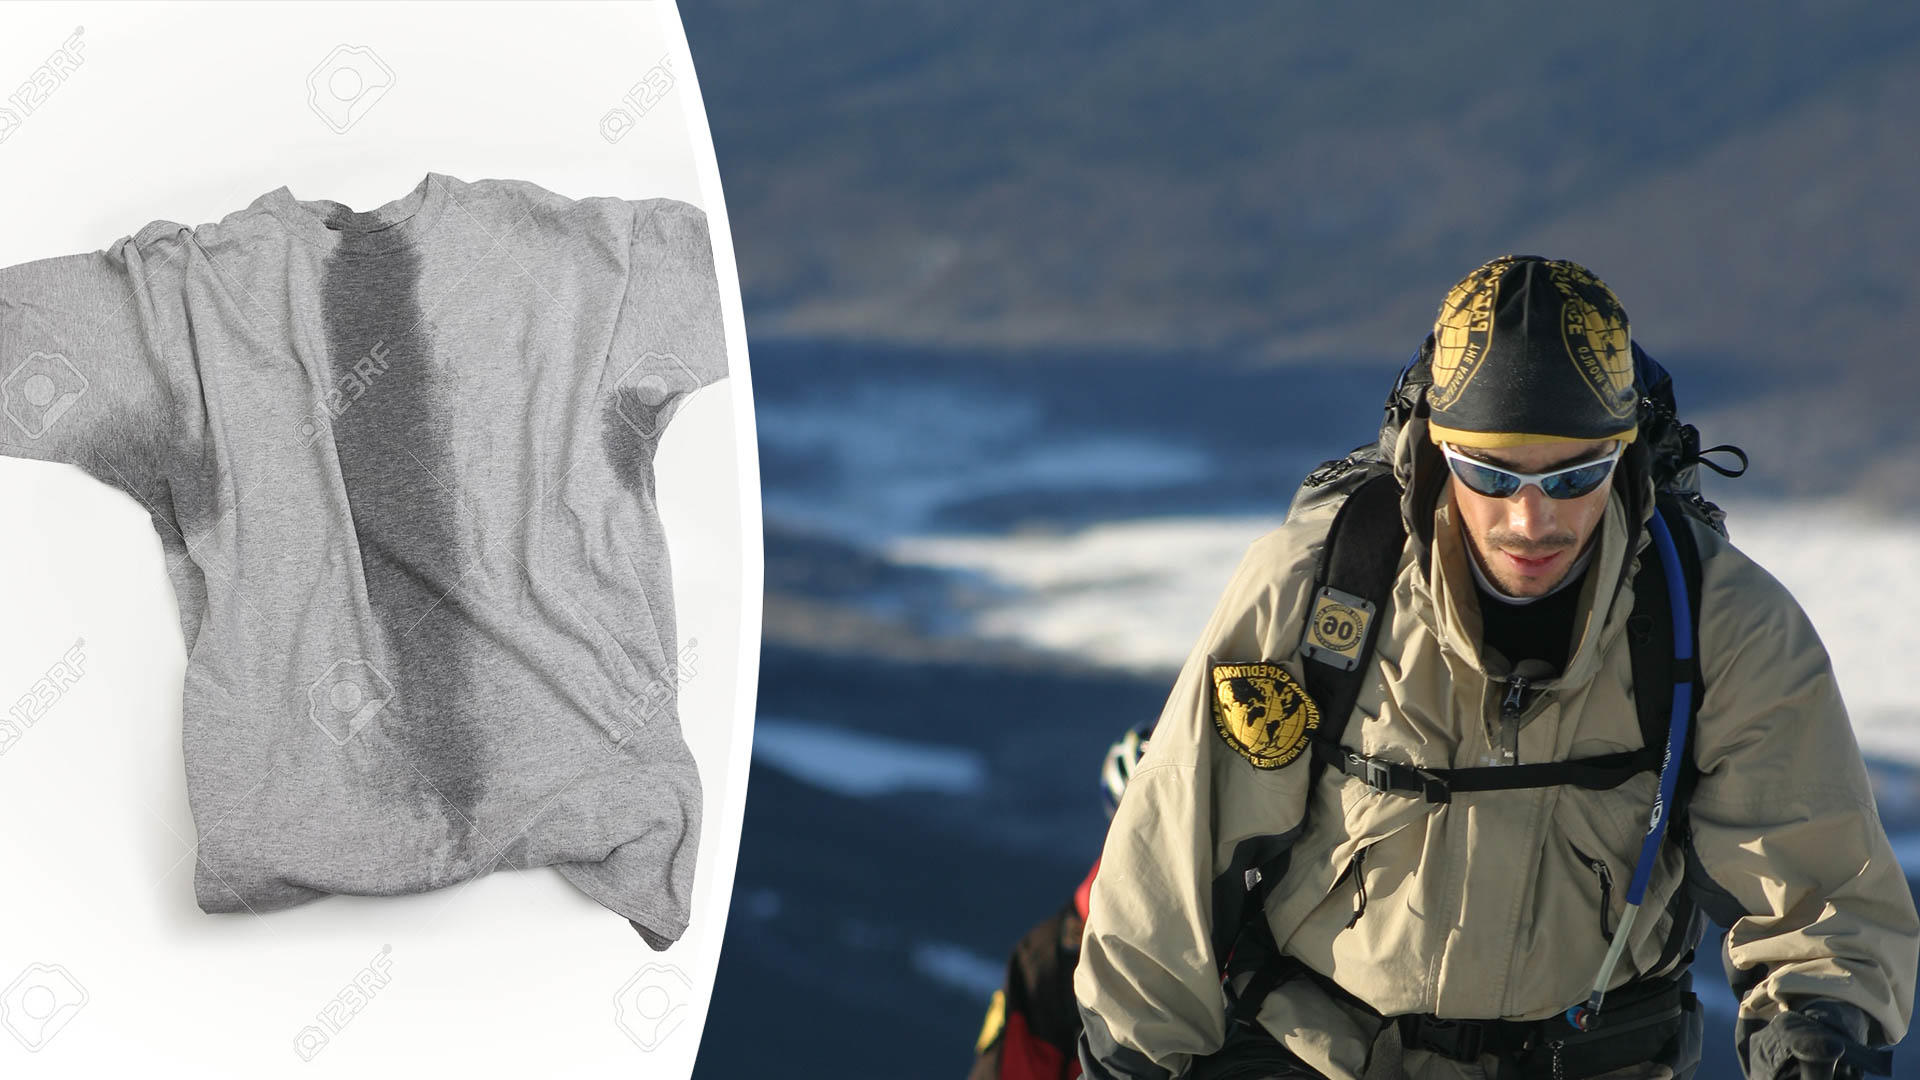 Photomontage Left image Stock photo. A grey t-shirt with sweat stains under sleeves and through the torso. Copyright: mjdphotography / 123RF Stock Photo Right Image A participant of an Adventure Race in Patagonia hikes up a mountain in full alpine gear. He is wearing an Original Buff® as beanie. You can see sweat on his face but the Buff® looks dry. © Unknown. Released by Original Buff S.A for the promotion of Buff® products.